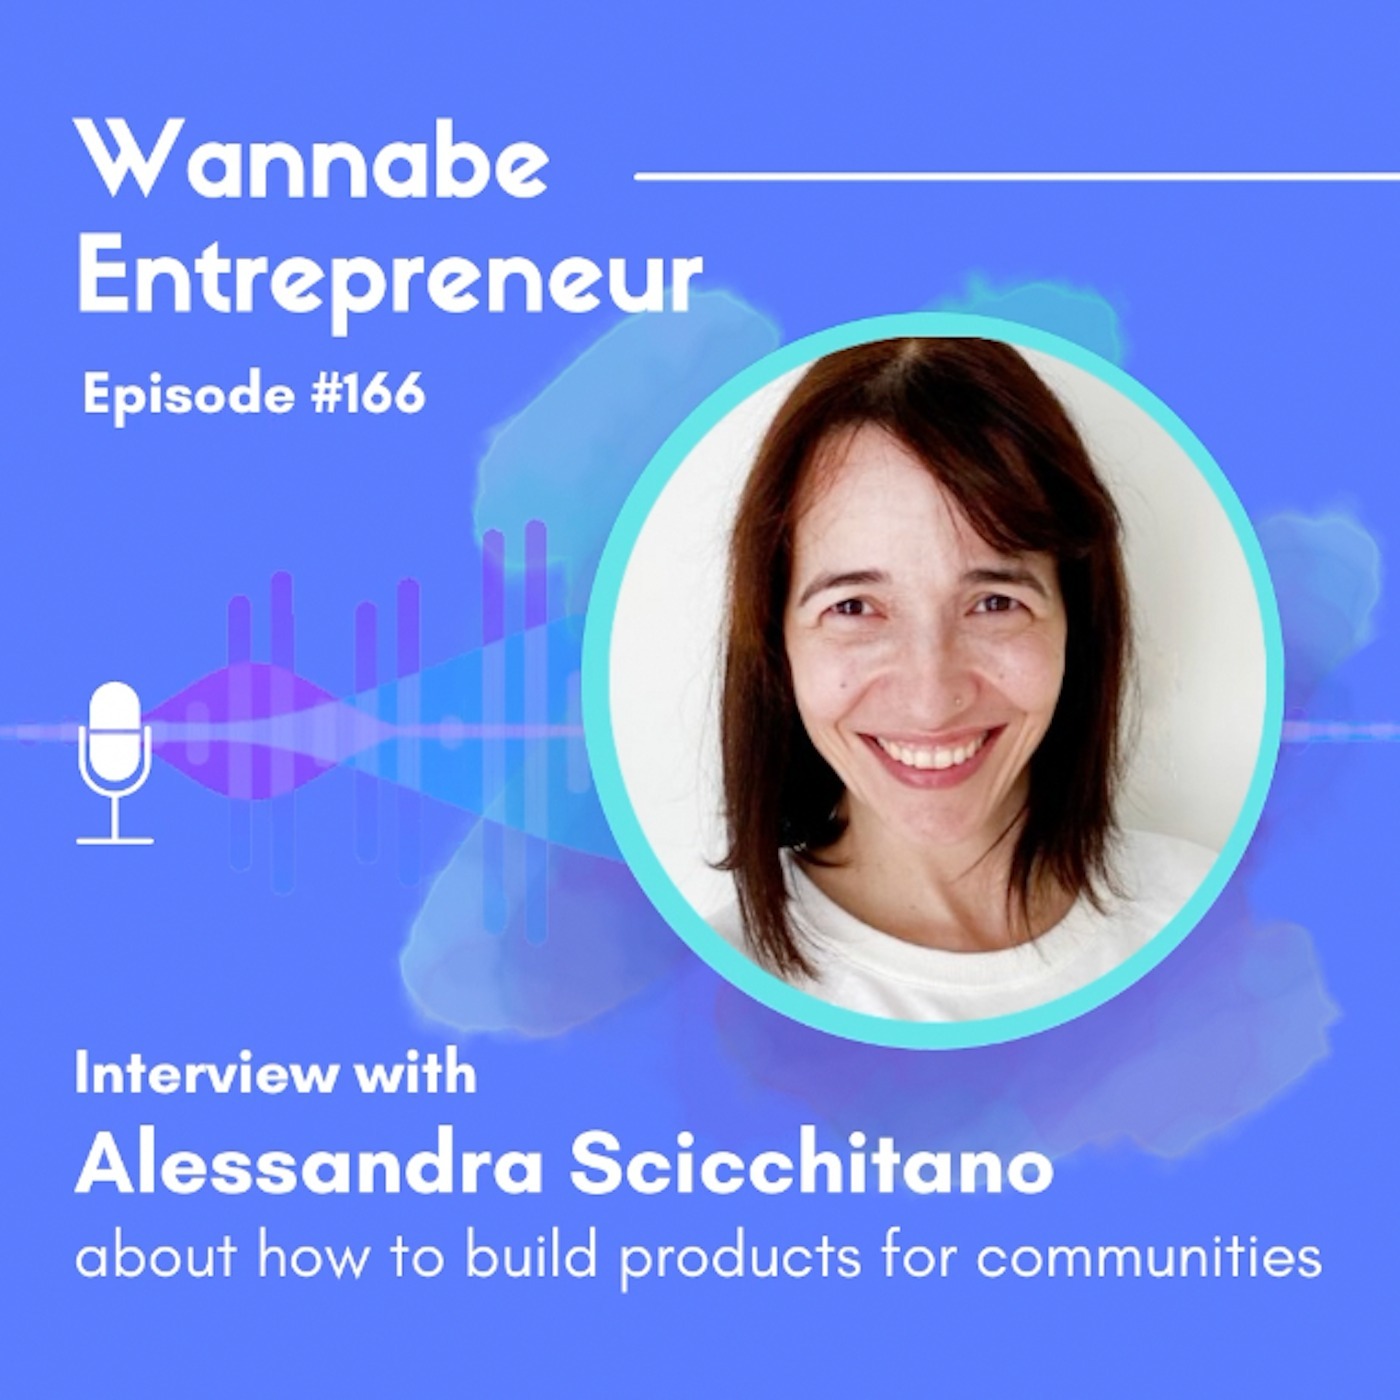 Interviewing Alessandra about how to build products for communities